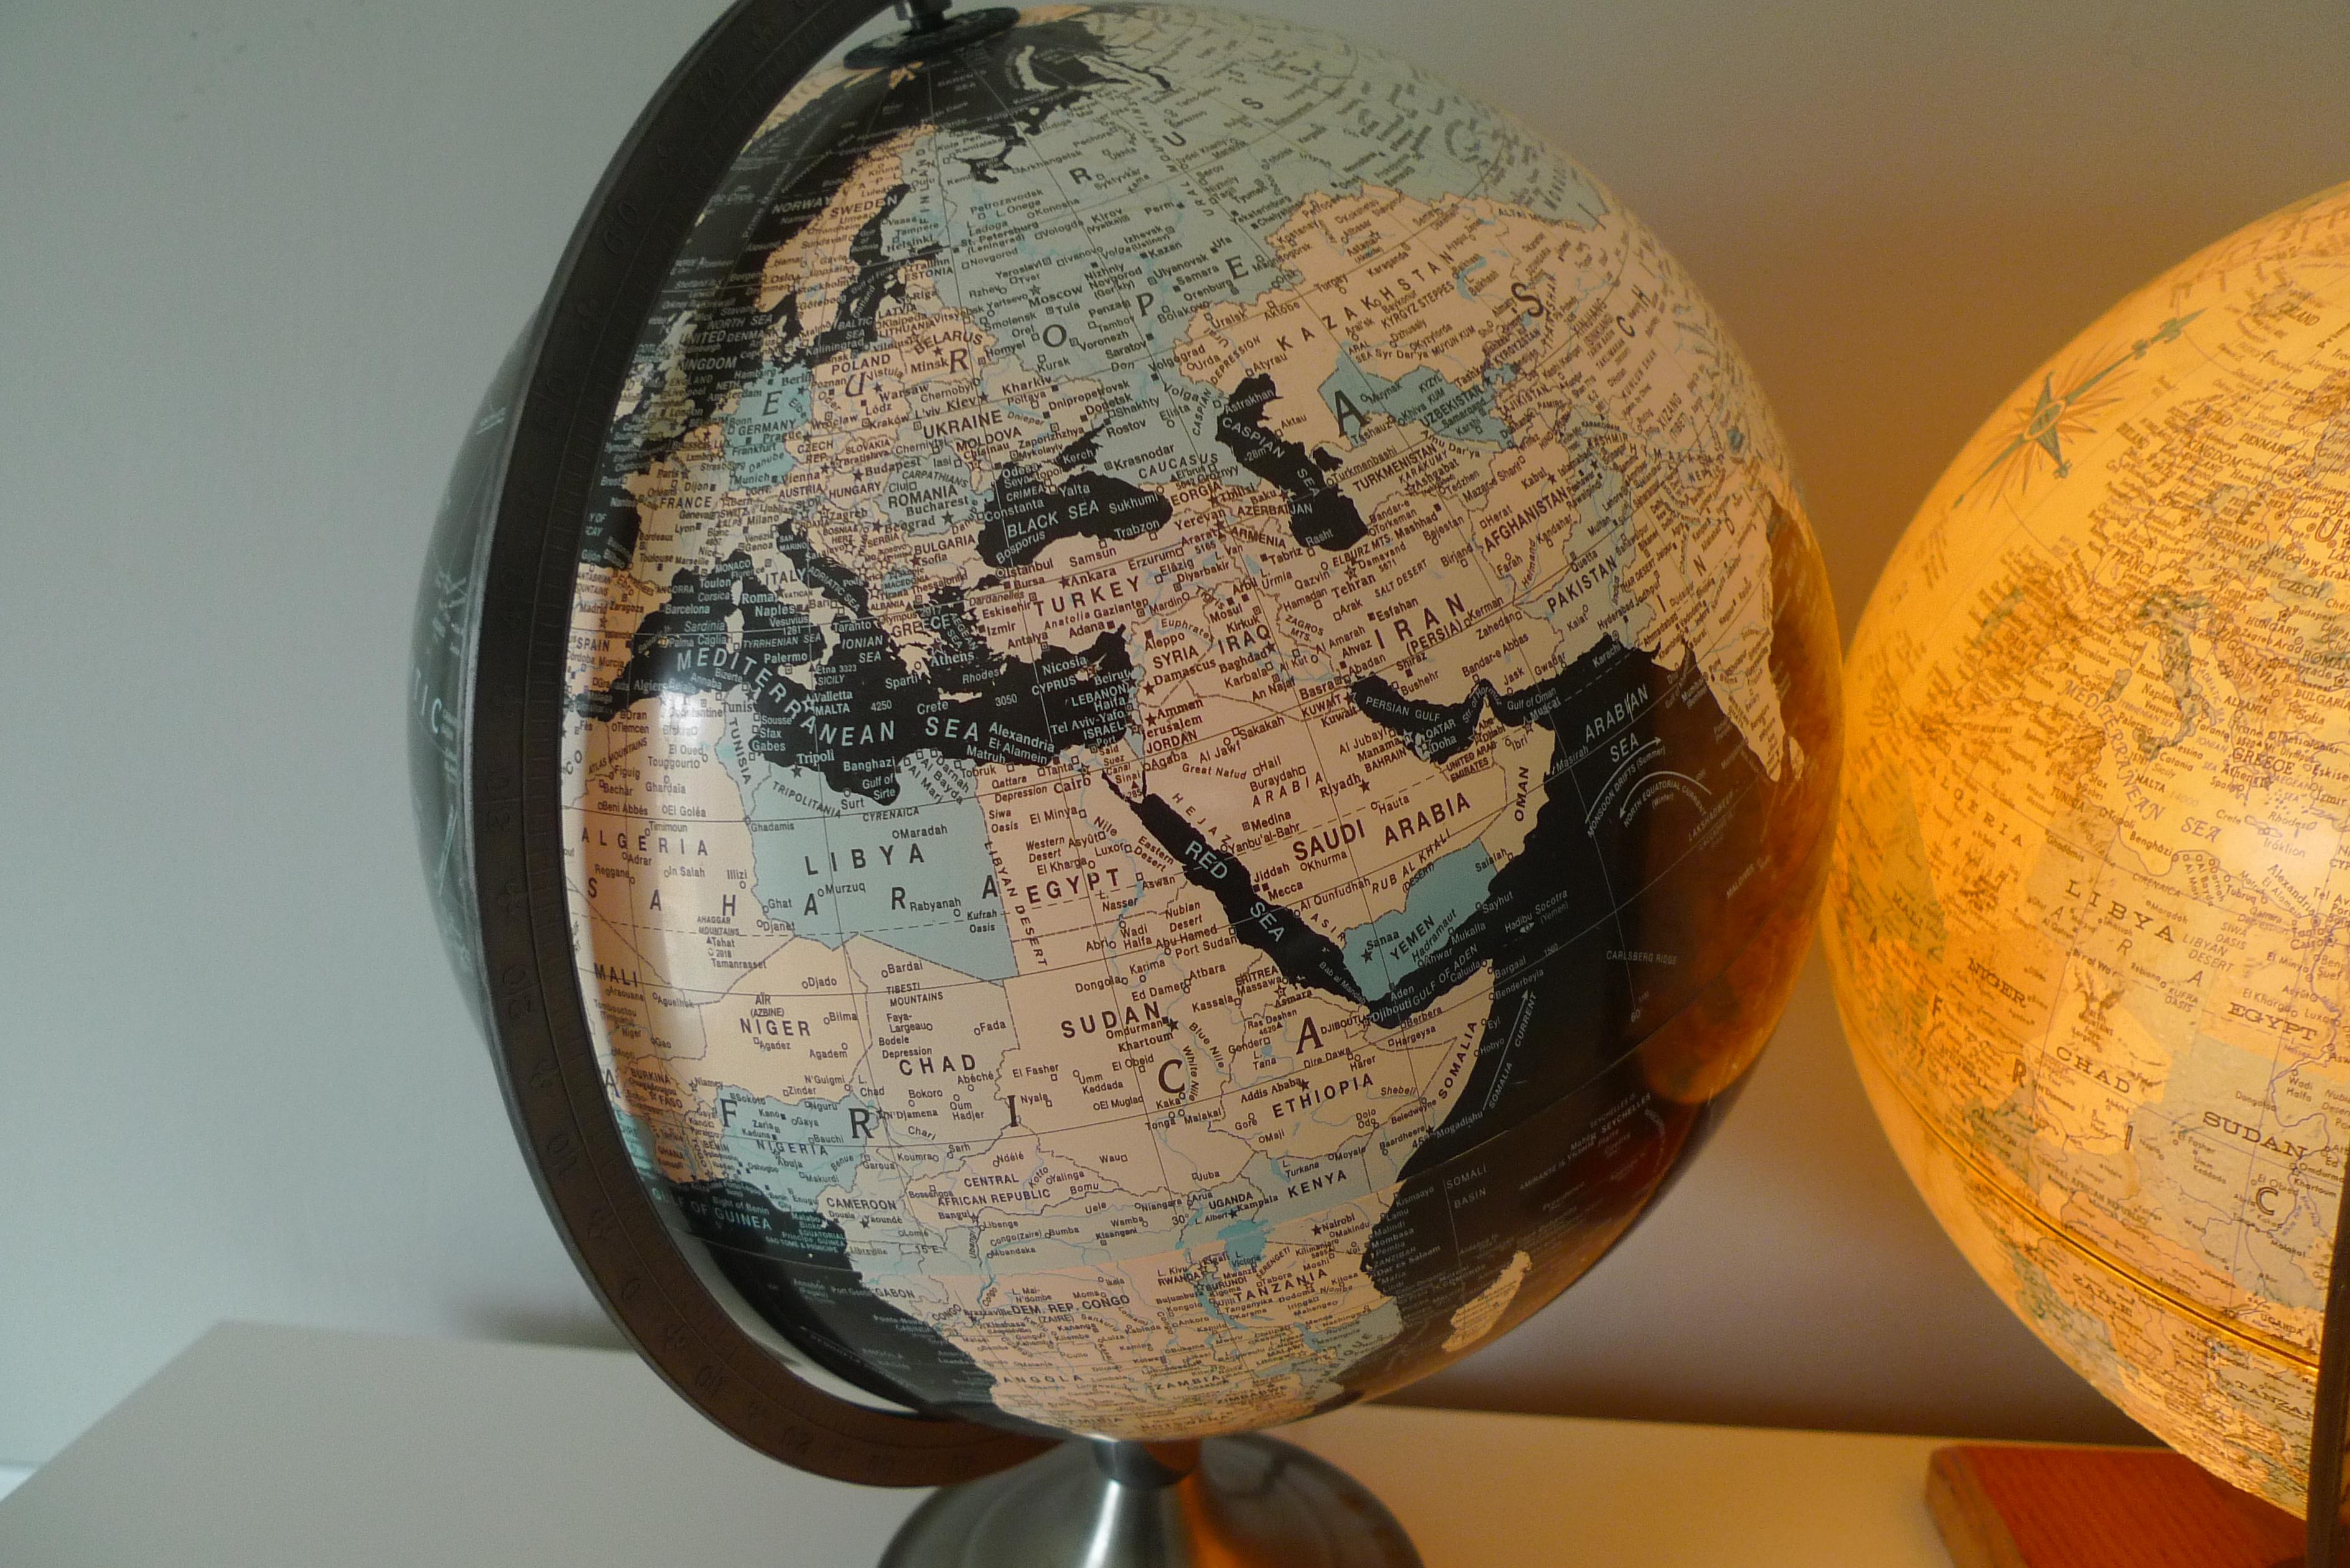 Pair of illuminated globes from Replogle. The darker colored globe is a Scan Globe with population centers delineated. Its stand is circular steel. The lighter colored globe is from the Premier Series and has raised topographical highlights. Its